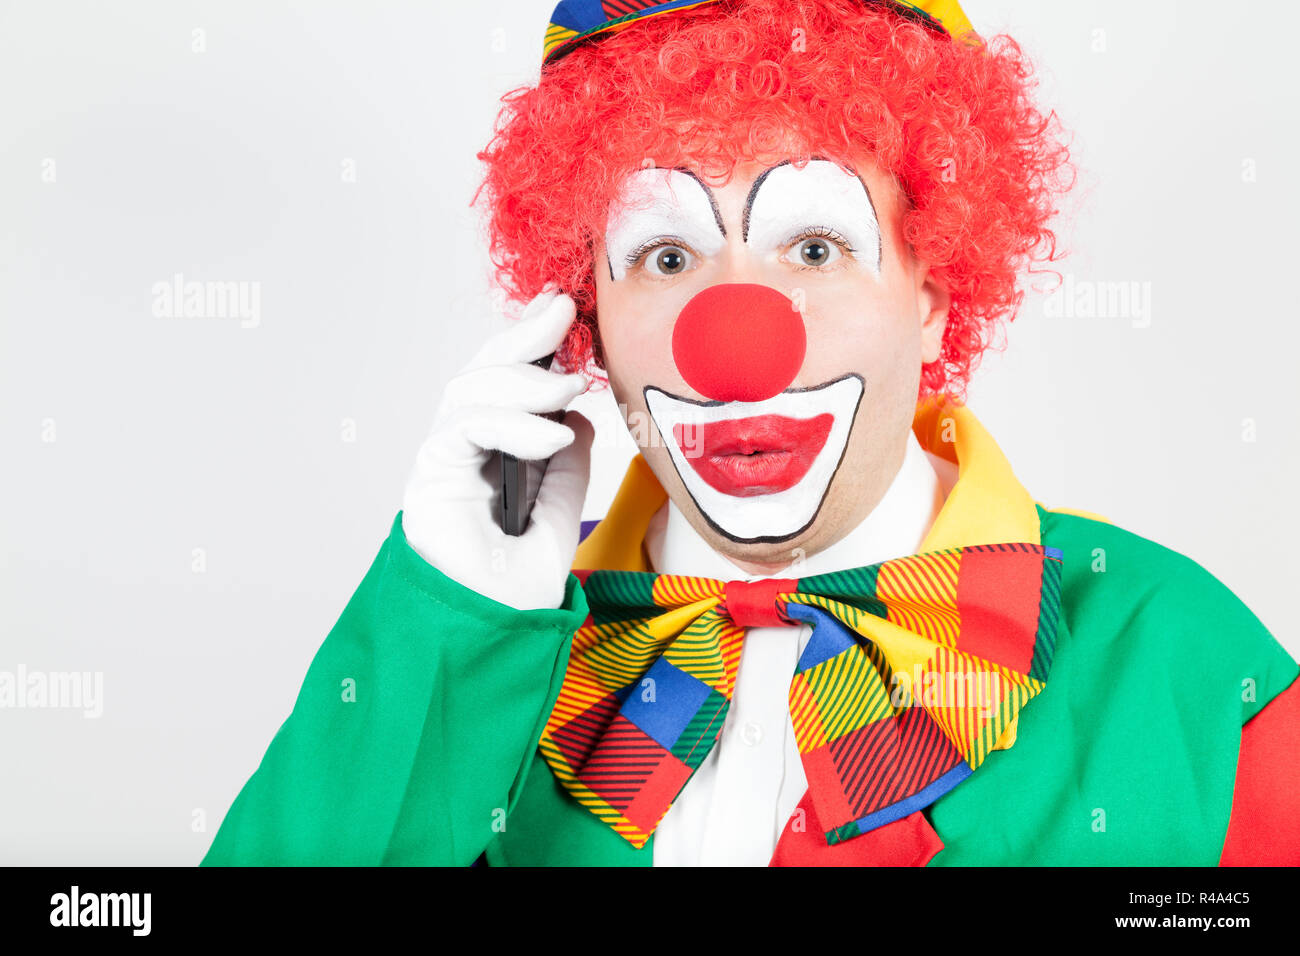 Clown Phone High Resolution Stock Photography and Images Alamy